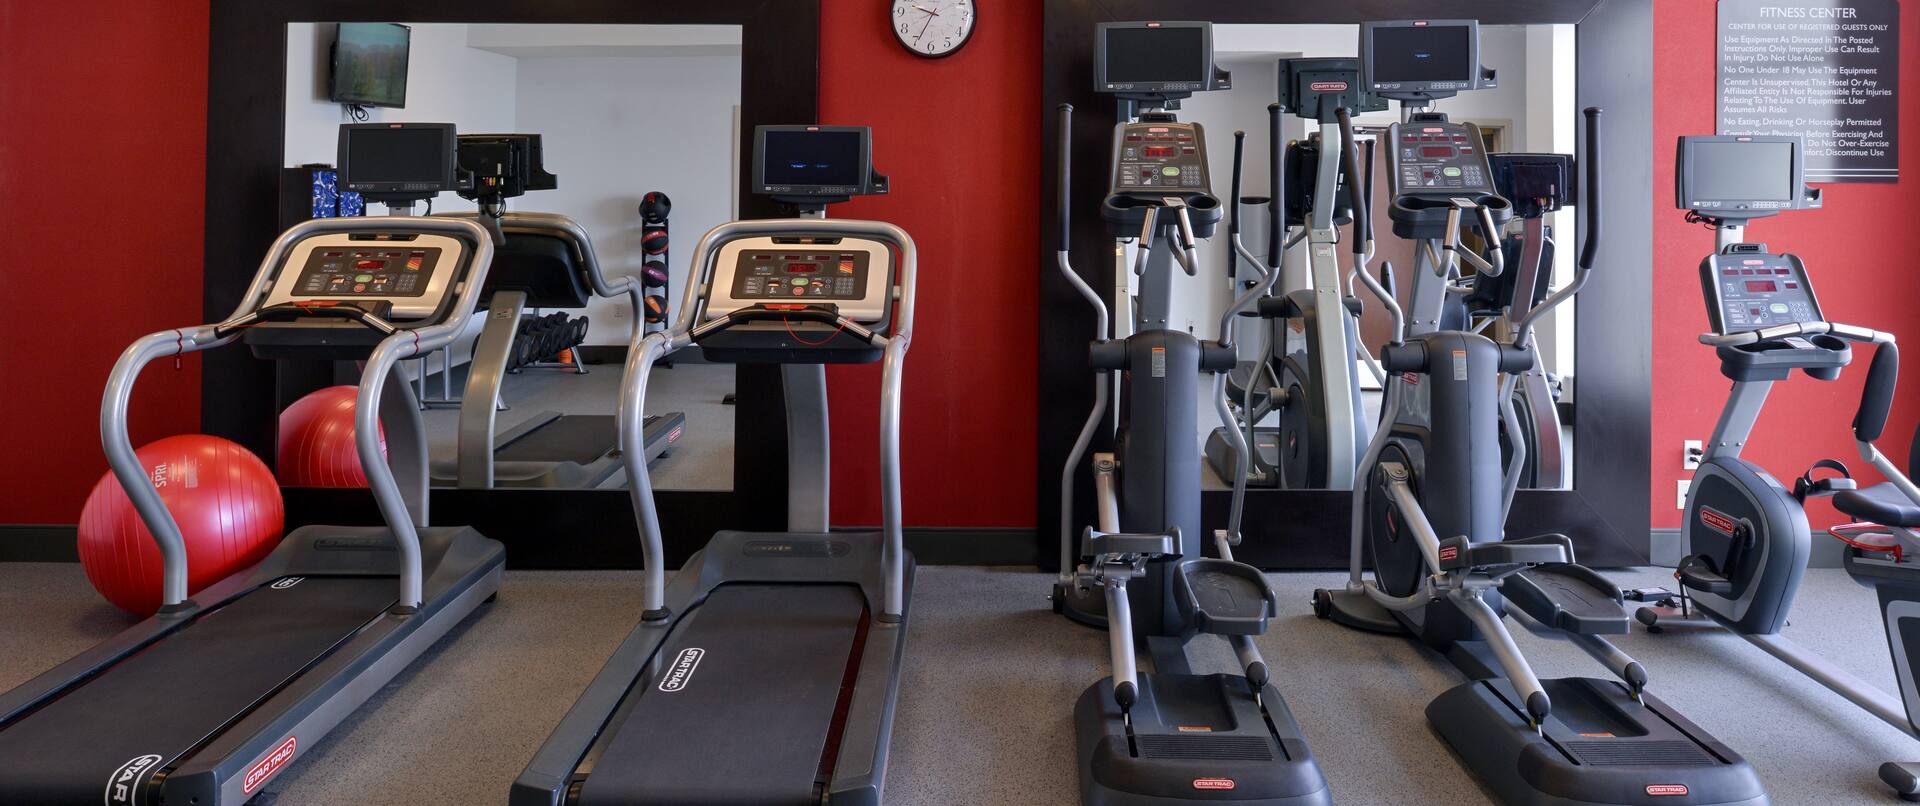 Fitness Center With TV, Red Exercise Ball and Cardio Equipment Facing Large Wall Mirrors, 